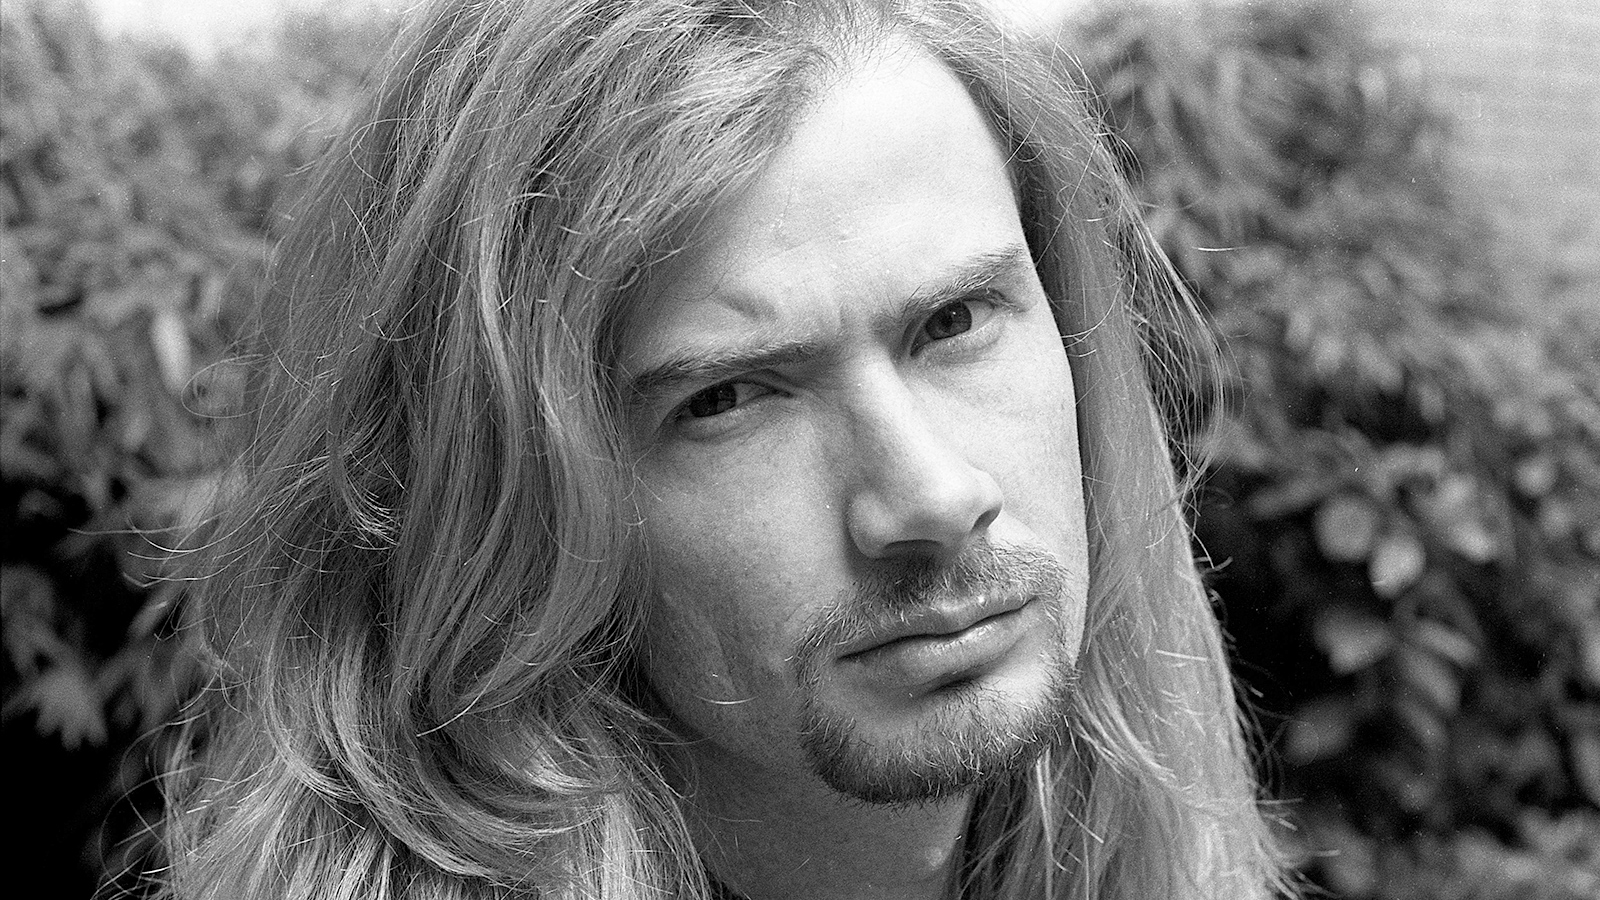 20 Great Dave Mustaine Quotes: Megadeth Frontman on Death, Sex, Metallica,  More | Revolver